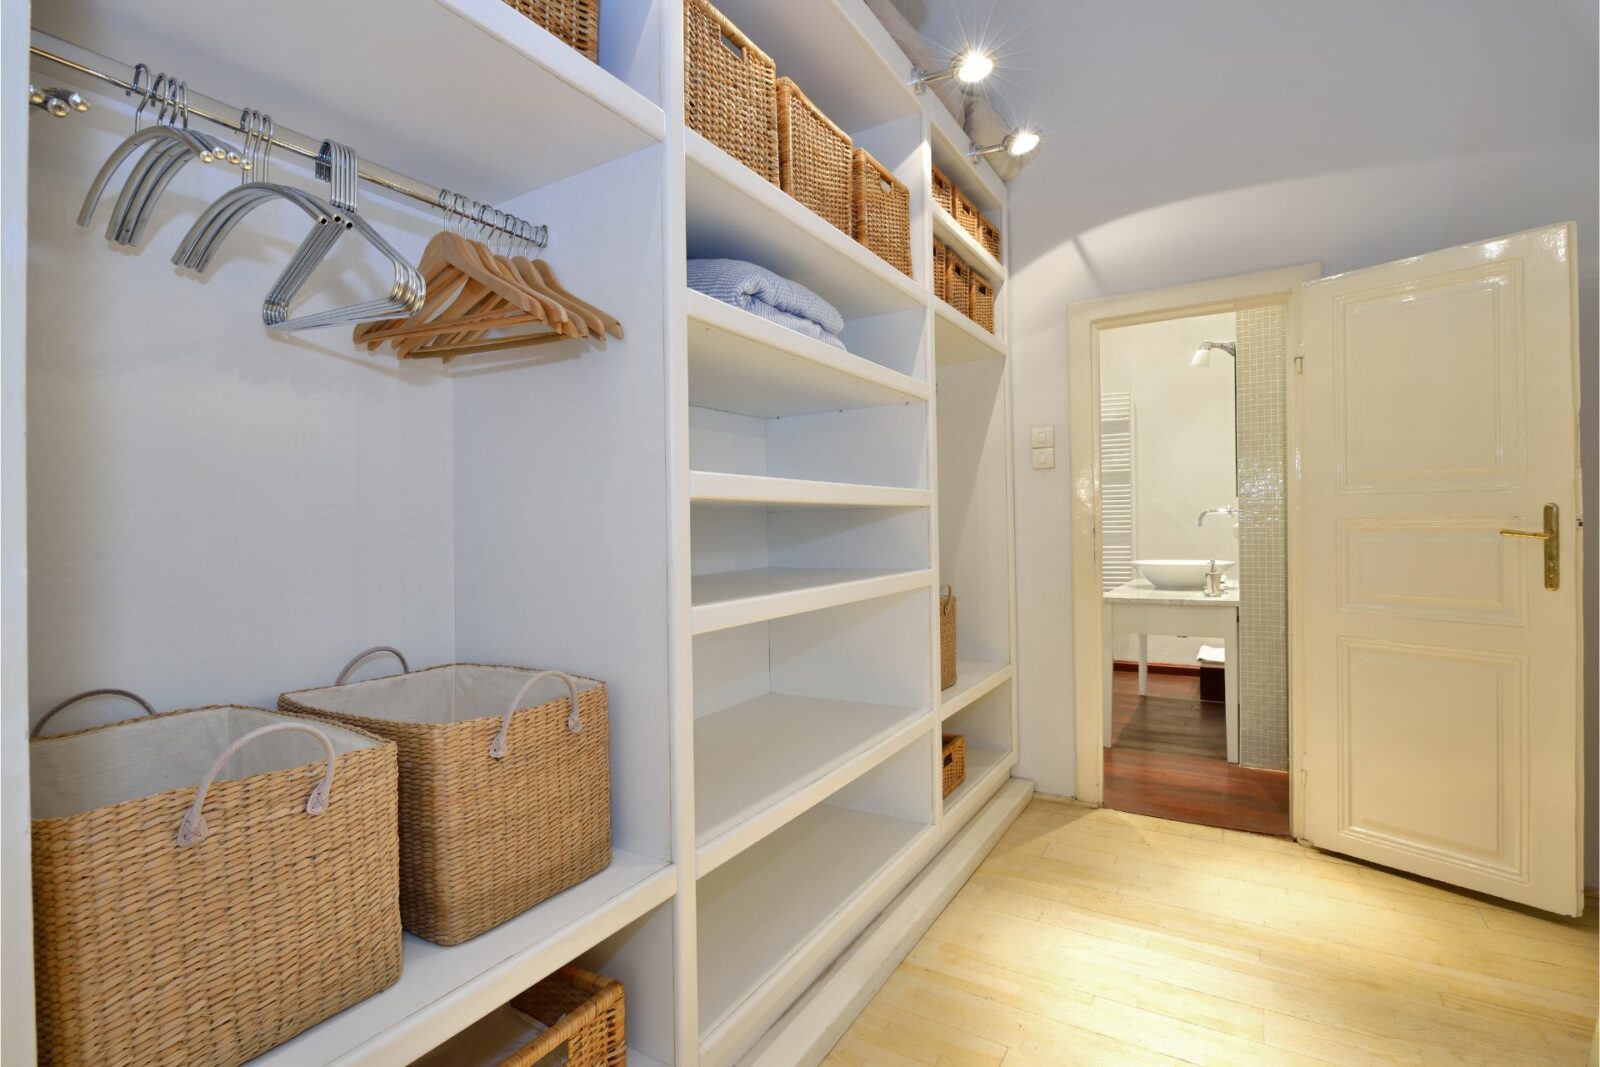 How to Organize a Small Walk In Closet